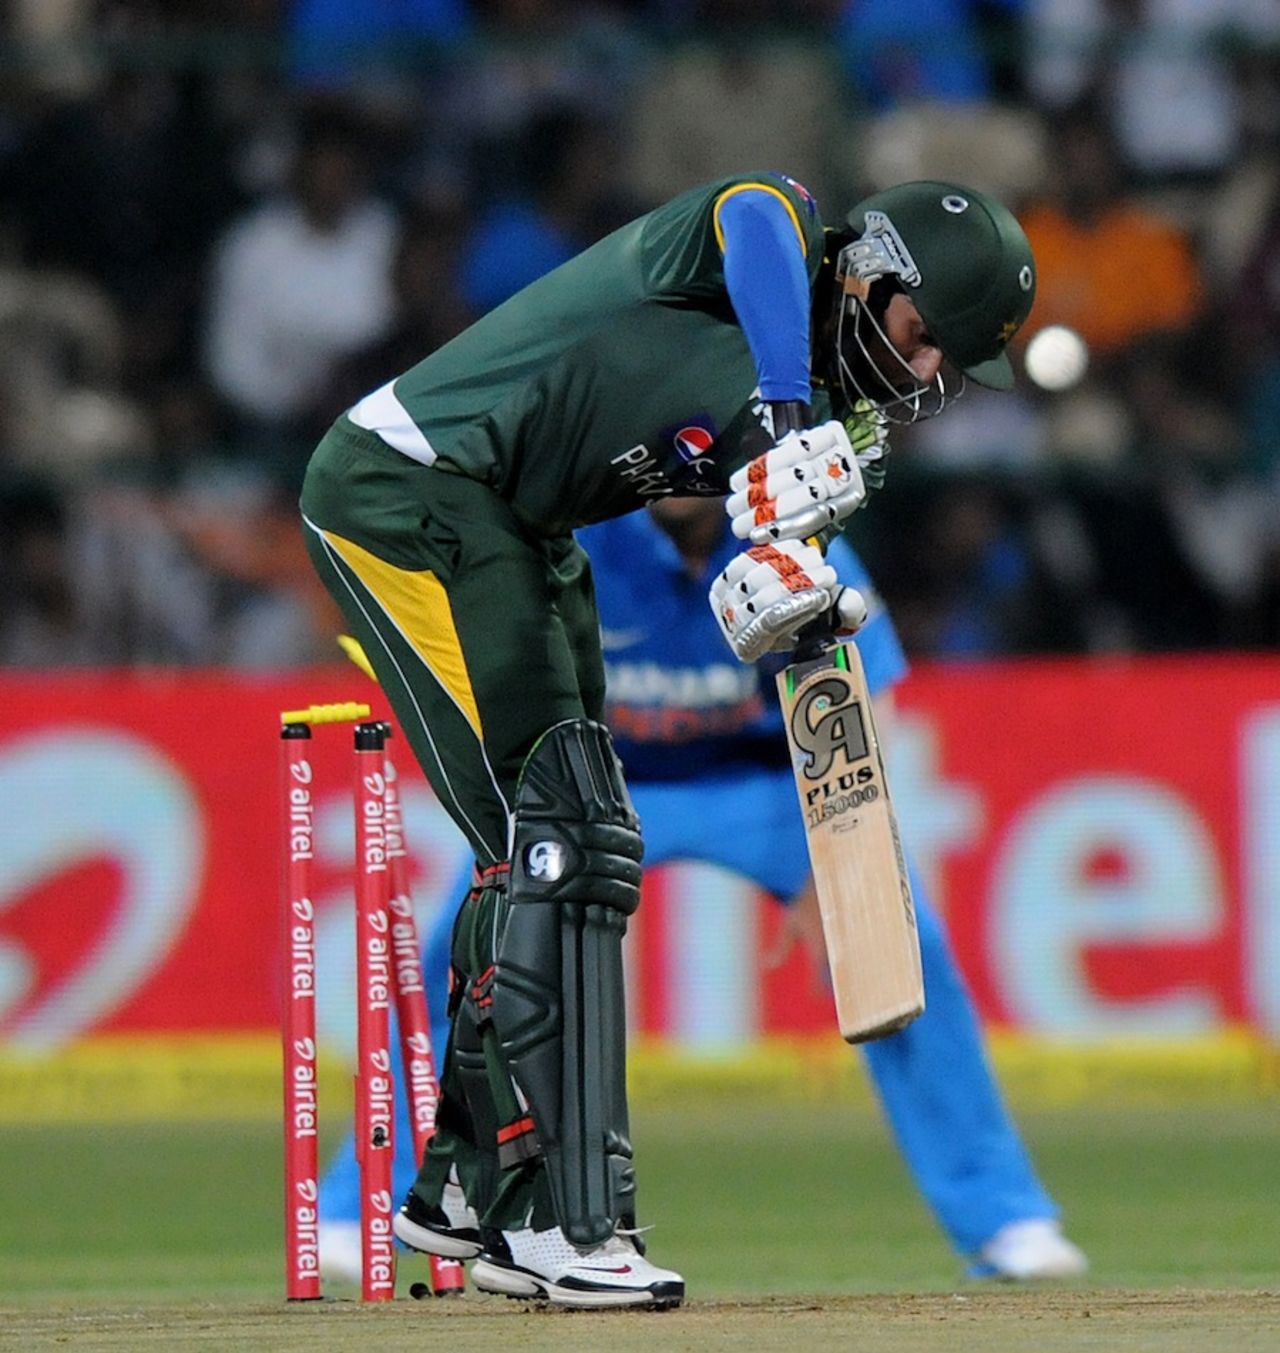 Nasir Jamshed was bowled by one that came in to him, India v Pakistan, 1st T20, Bangalore, December 25, 2012